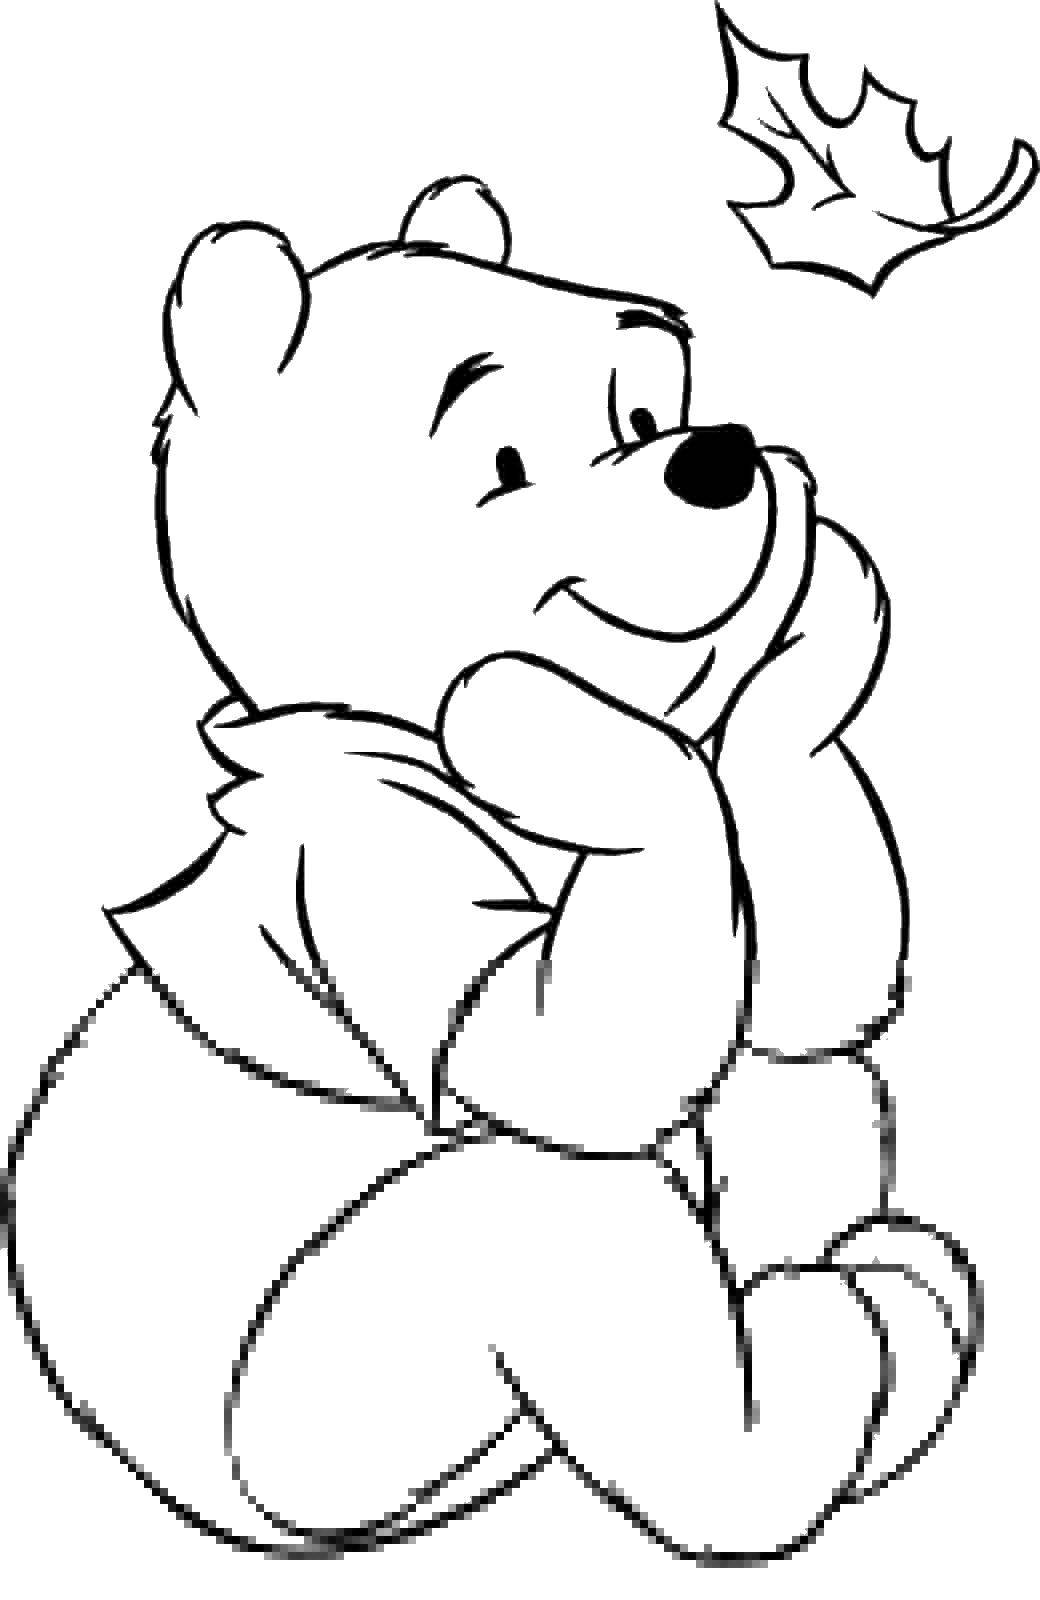 Coloring Winnie the Pooh. Category cartoons. Tags:  Winnie the Pooh, cartoon.